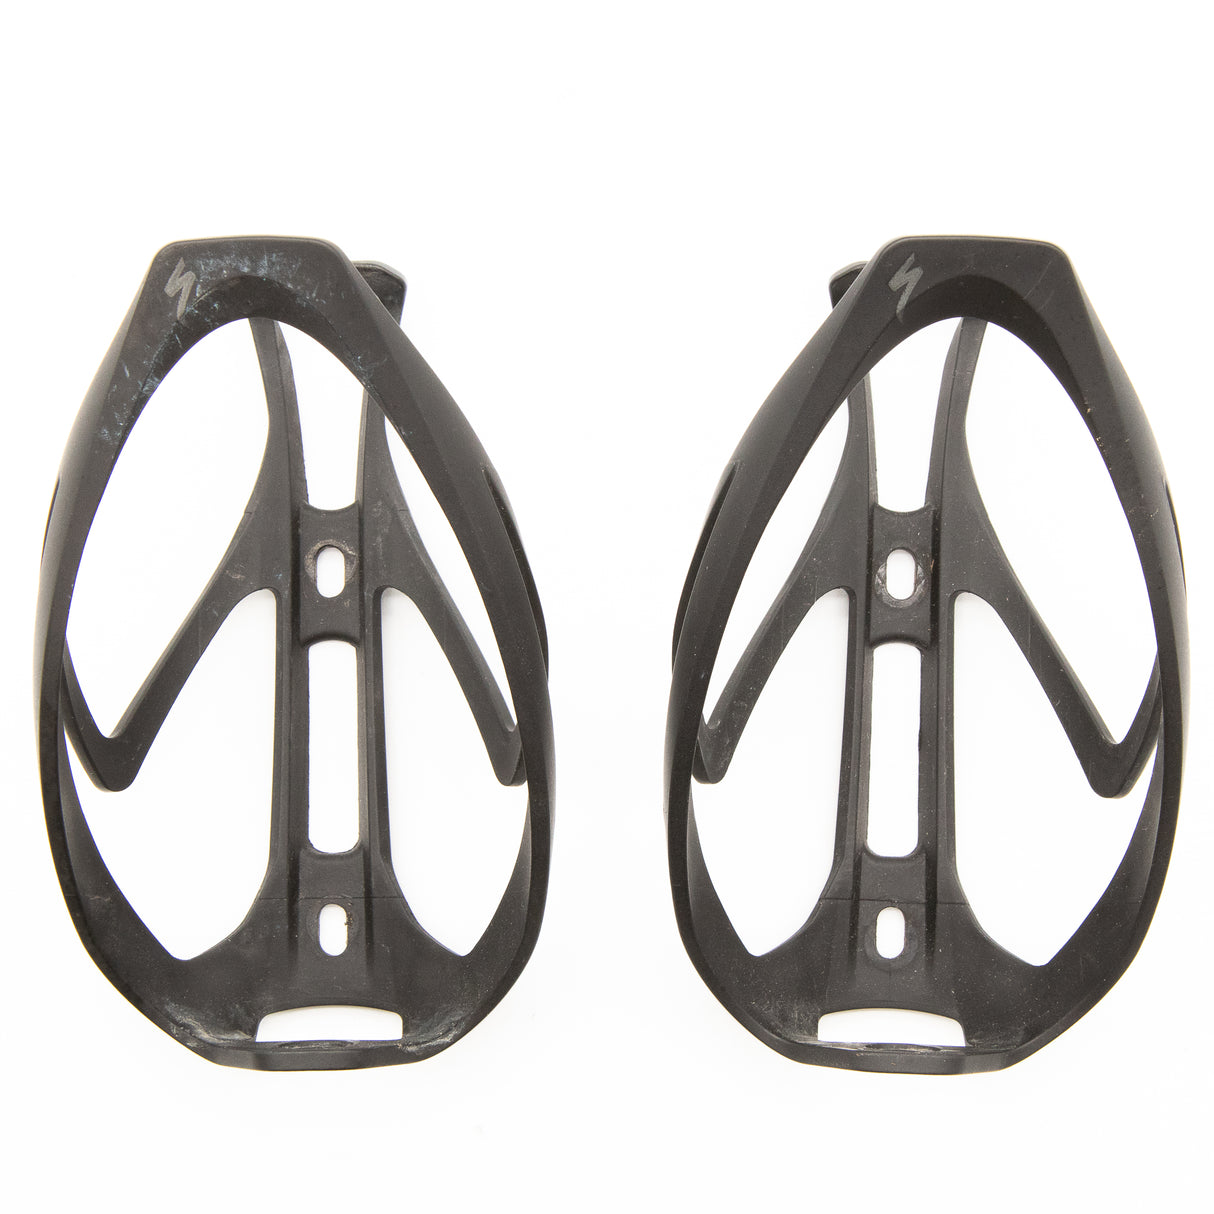 Specialized Rib II Black Matte Bottle Cages Pair 67g